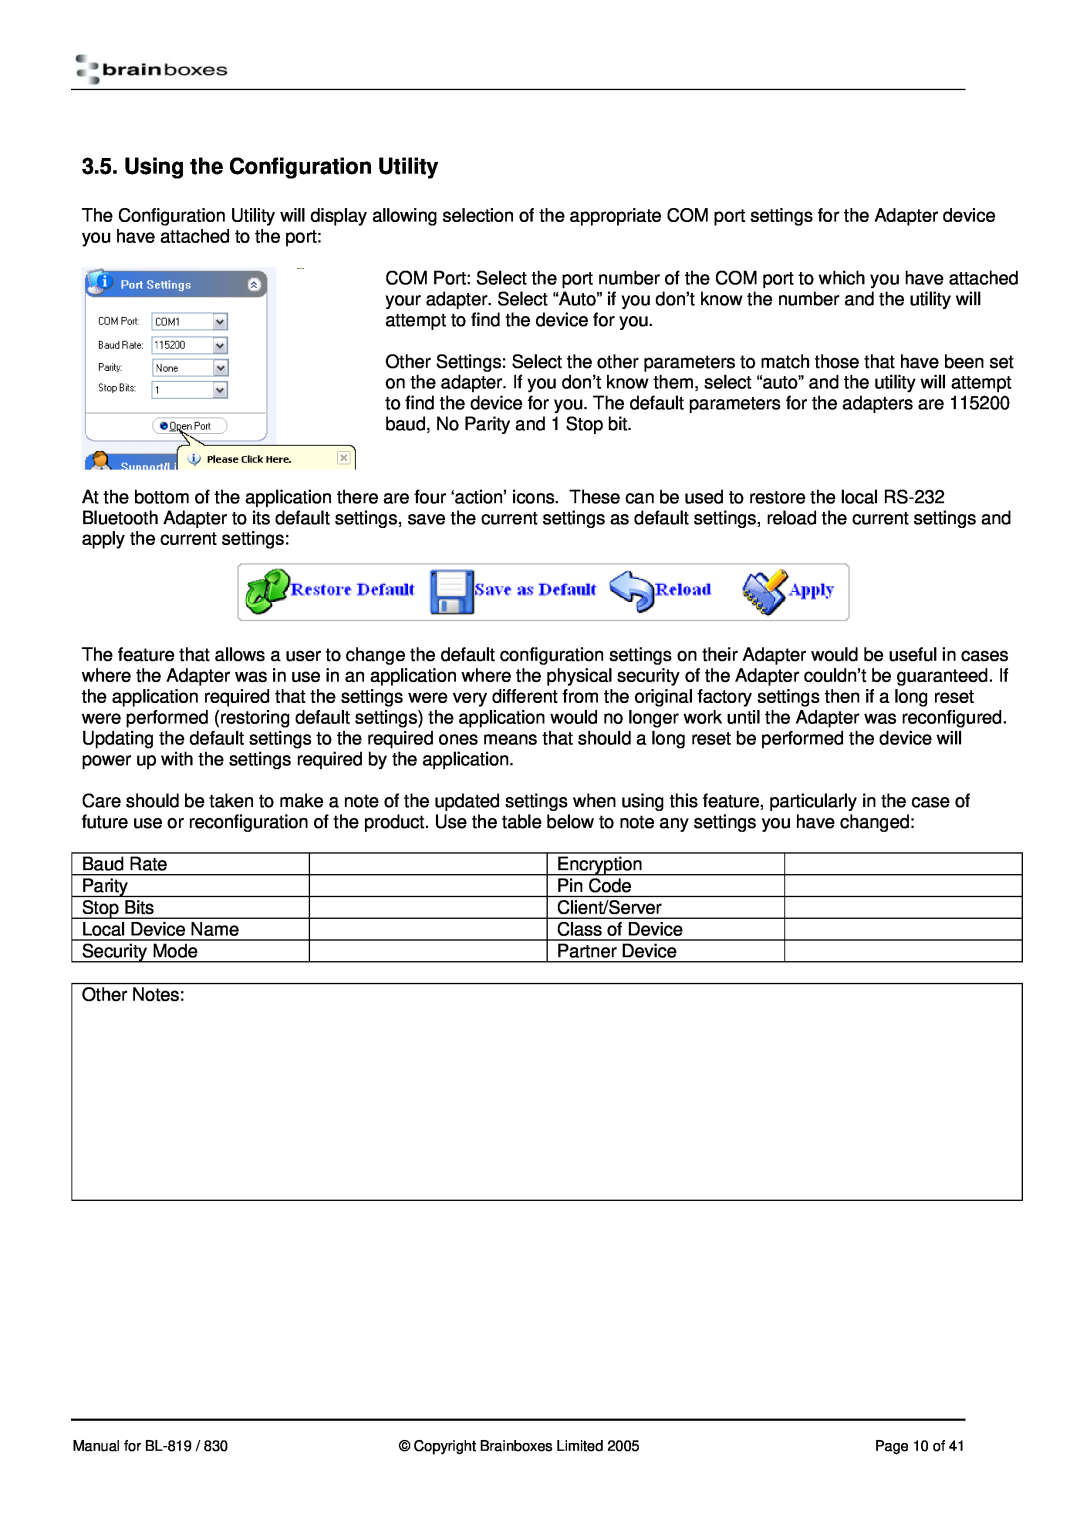 Brainboxes BL-830, BL-819 manual Using the Configuration Utility, Page 10 of 